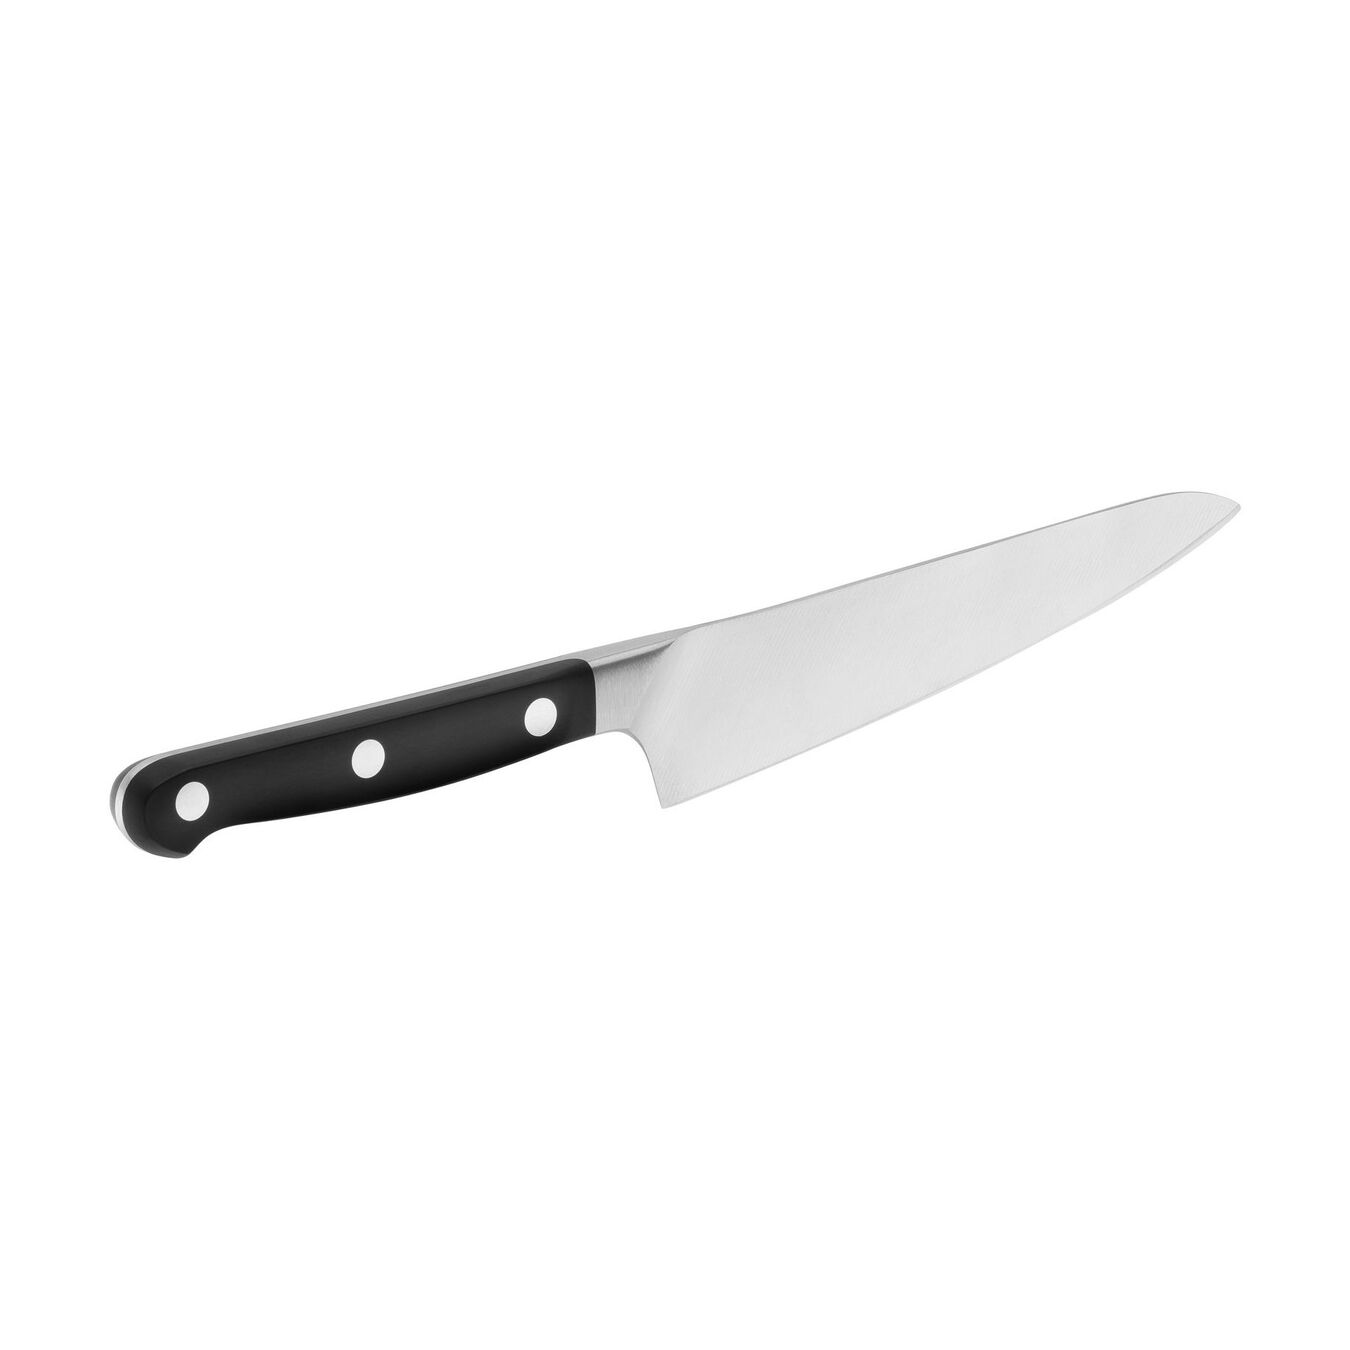 5.5-inch Chef's knife compact, Fine Edge  - Visual Imperfections,,large 6